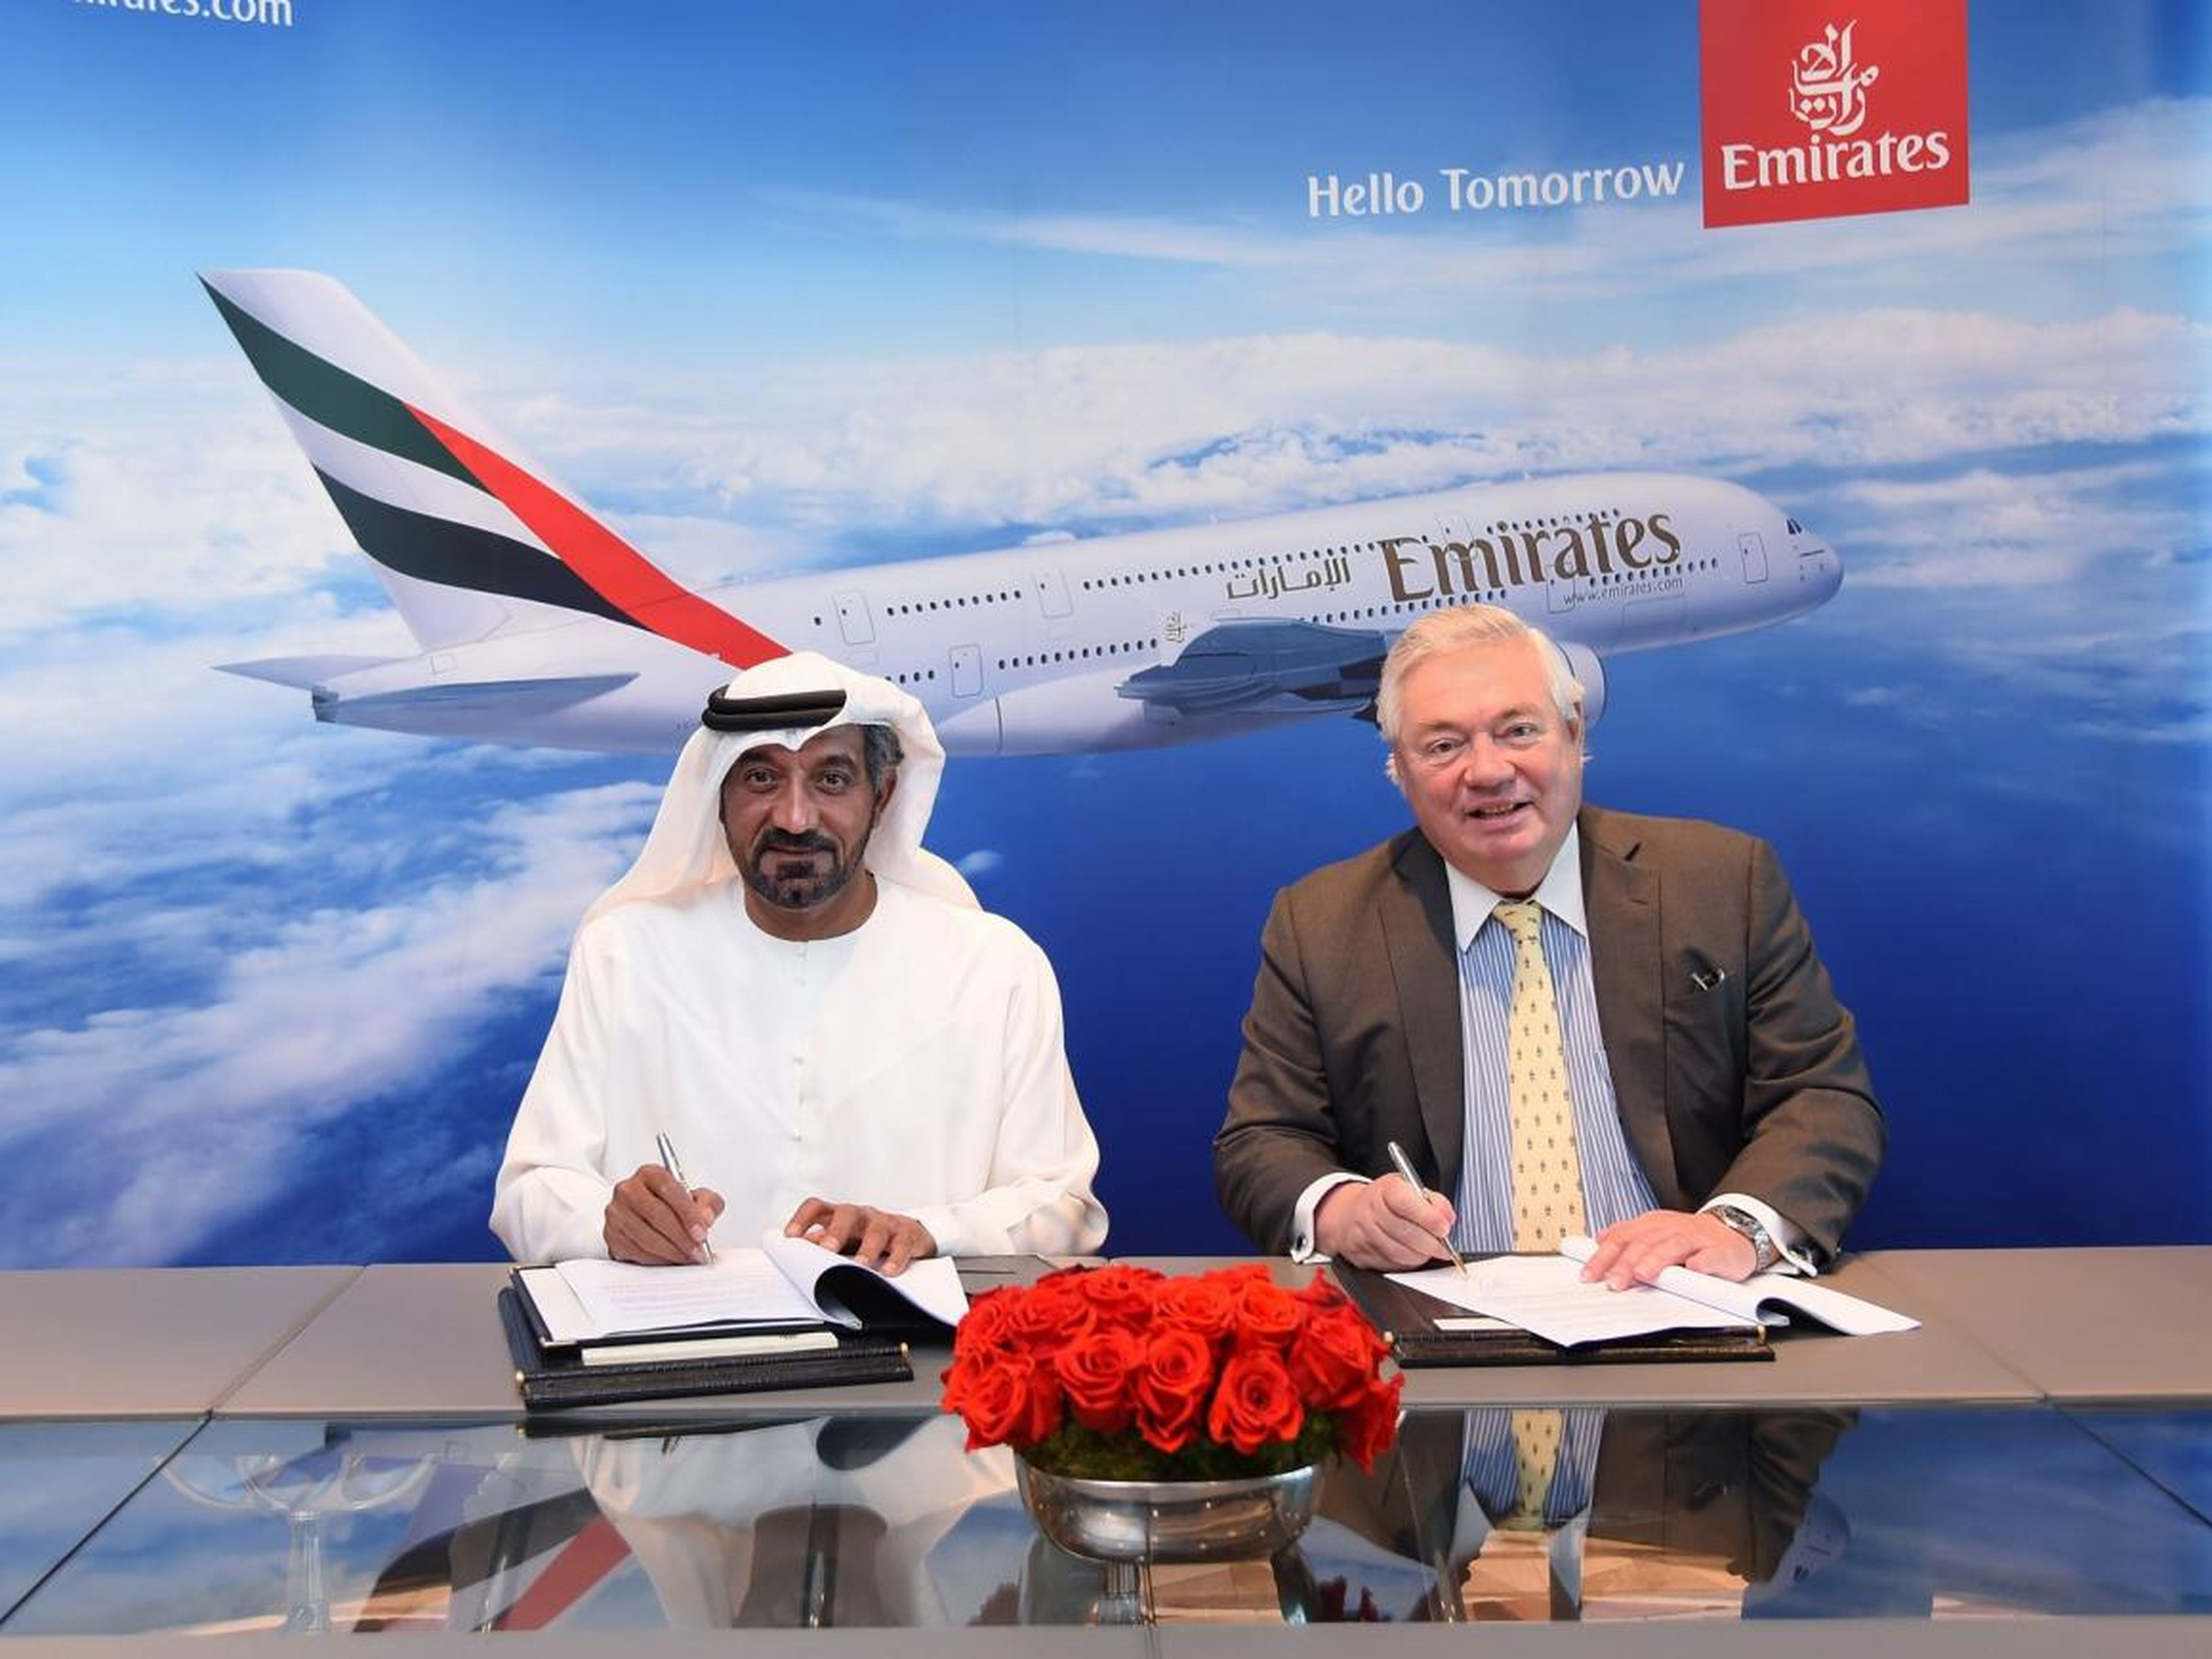 In January 2018, Emirates ordered 20 additional A380s that would have kept the A380 production line moving for the next decade.